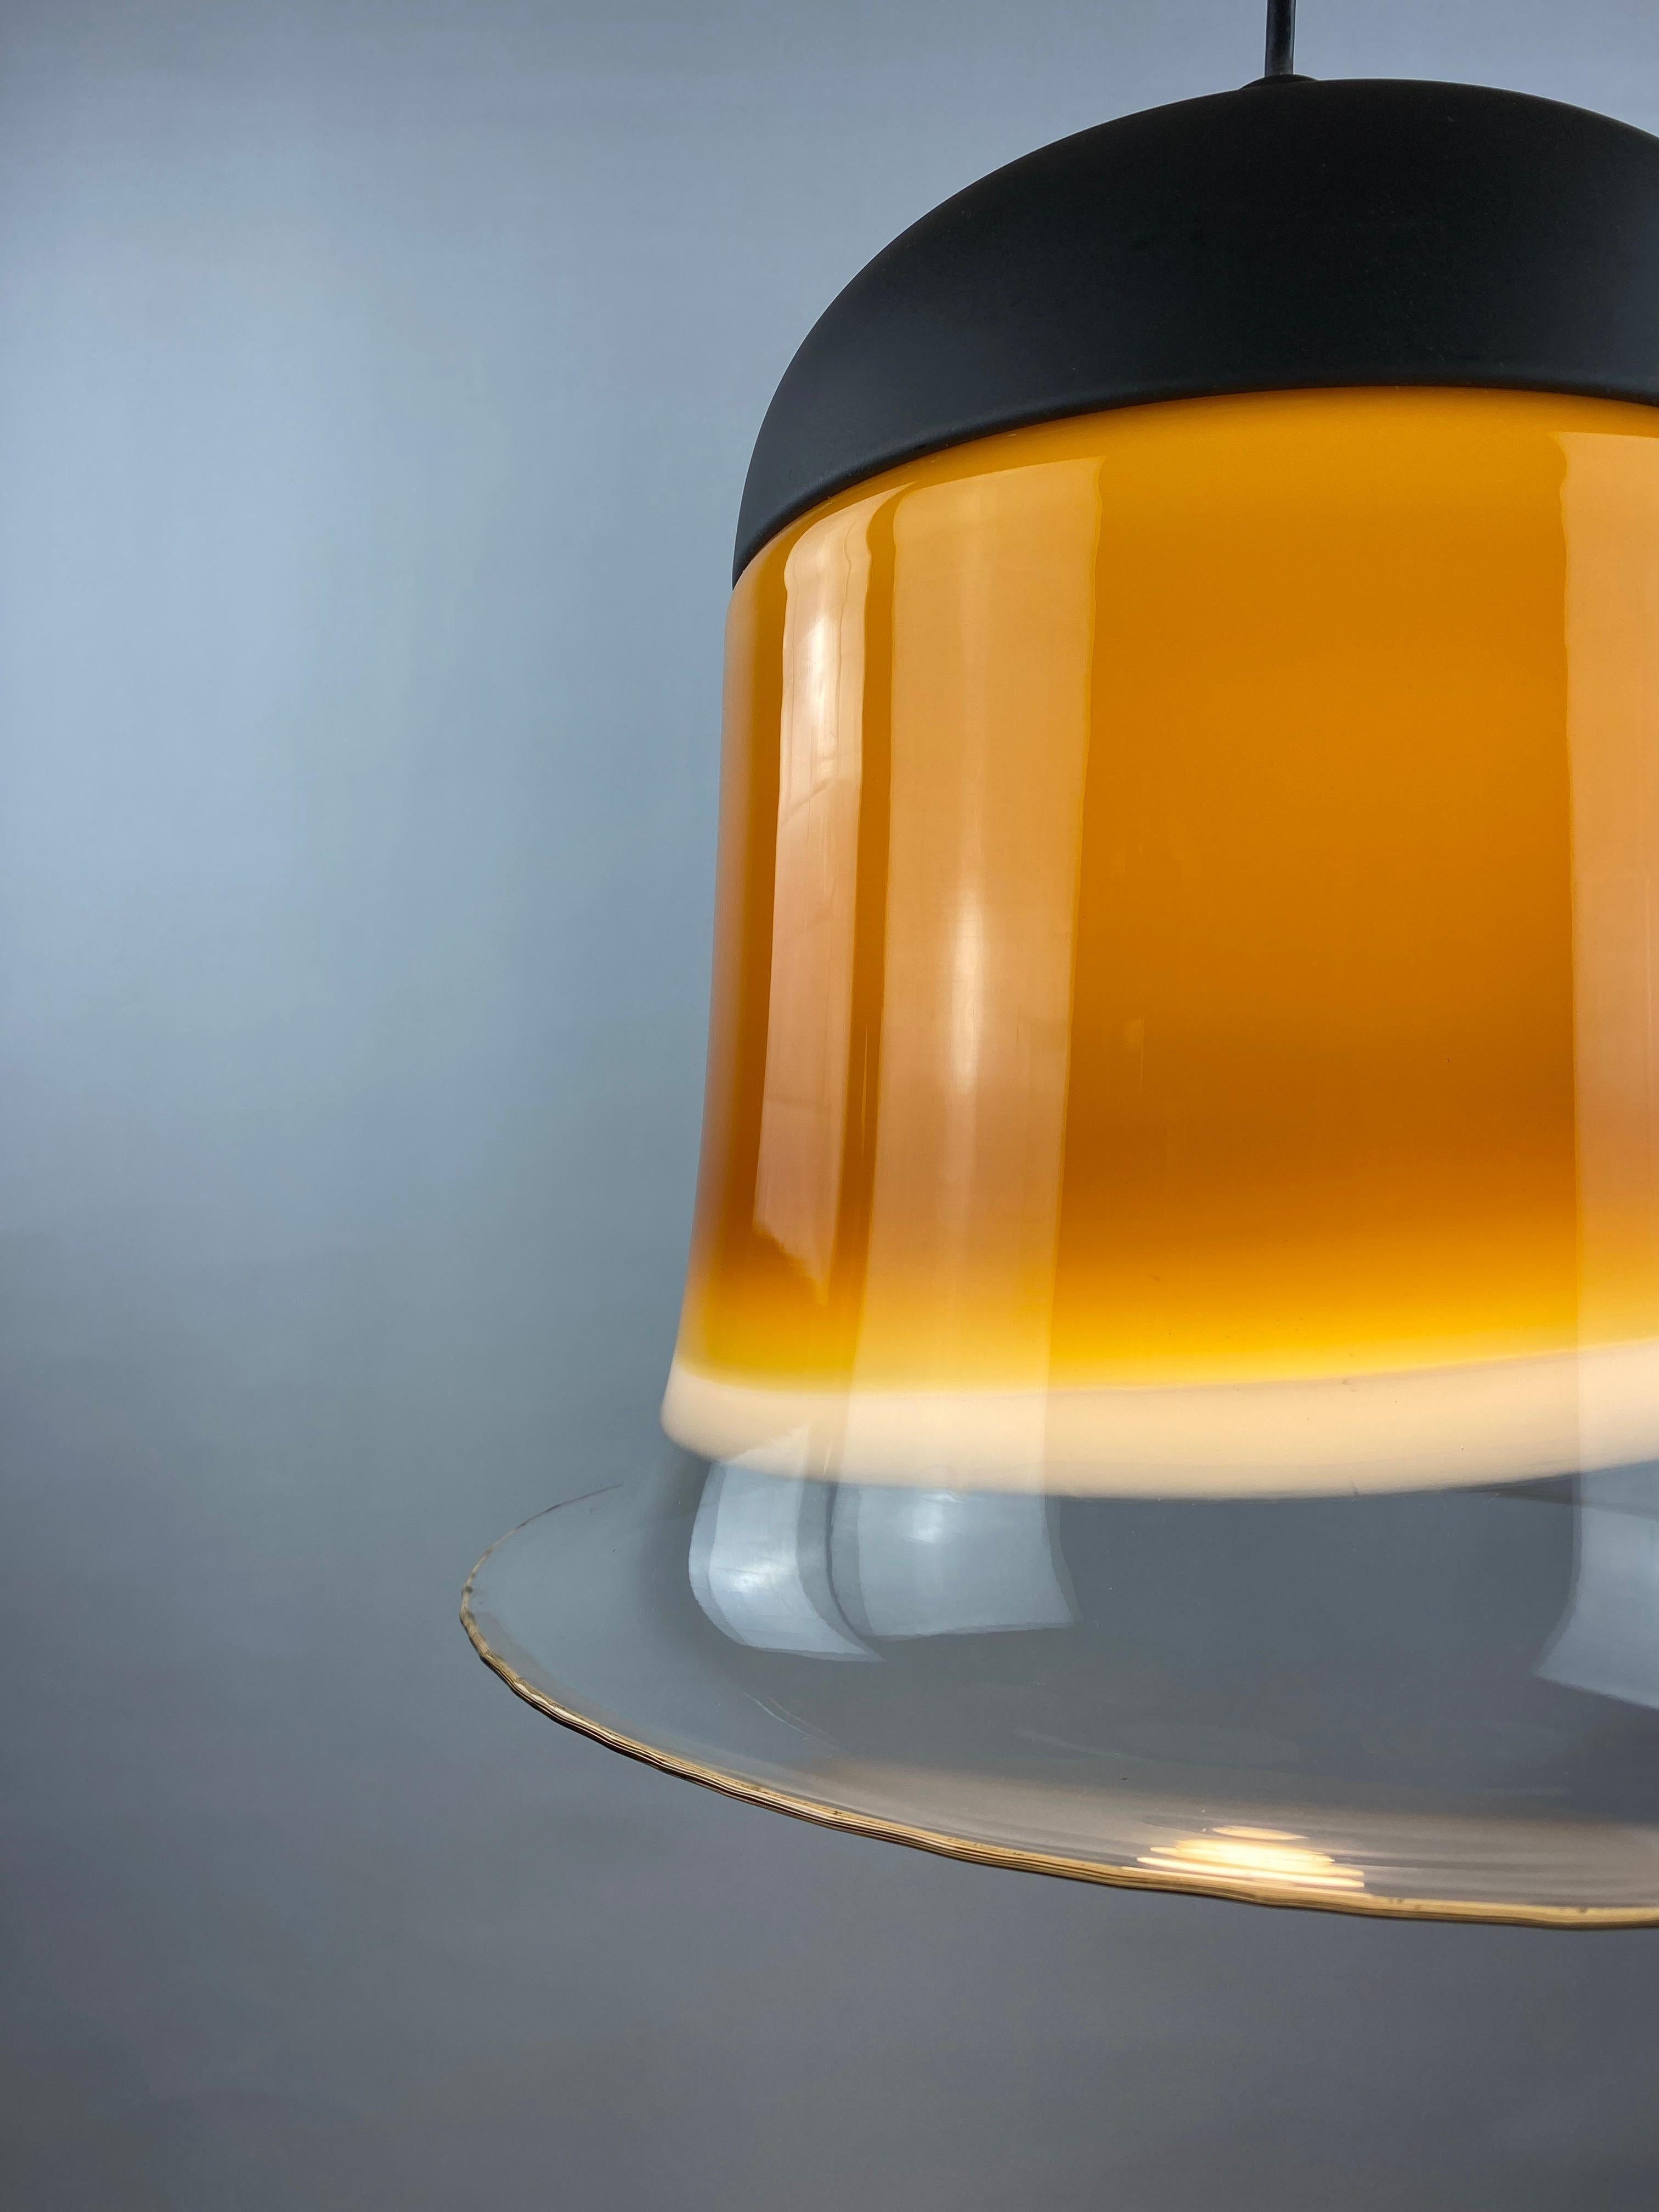 Cool cappuccino colored large glass dome pendant light by Peill and Putzler from the 1970's. Provides beautiful light through the colored surfaces on the glass.

It starts with a clear glass on the bottom which goes to white and then it reaches the